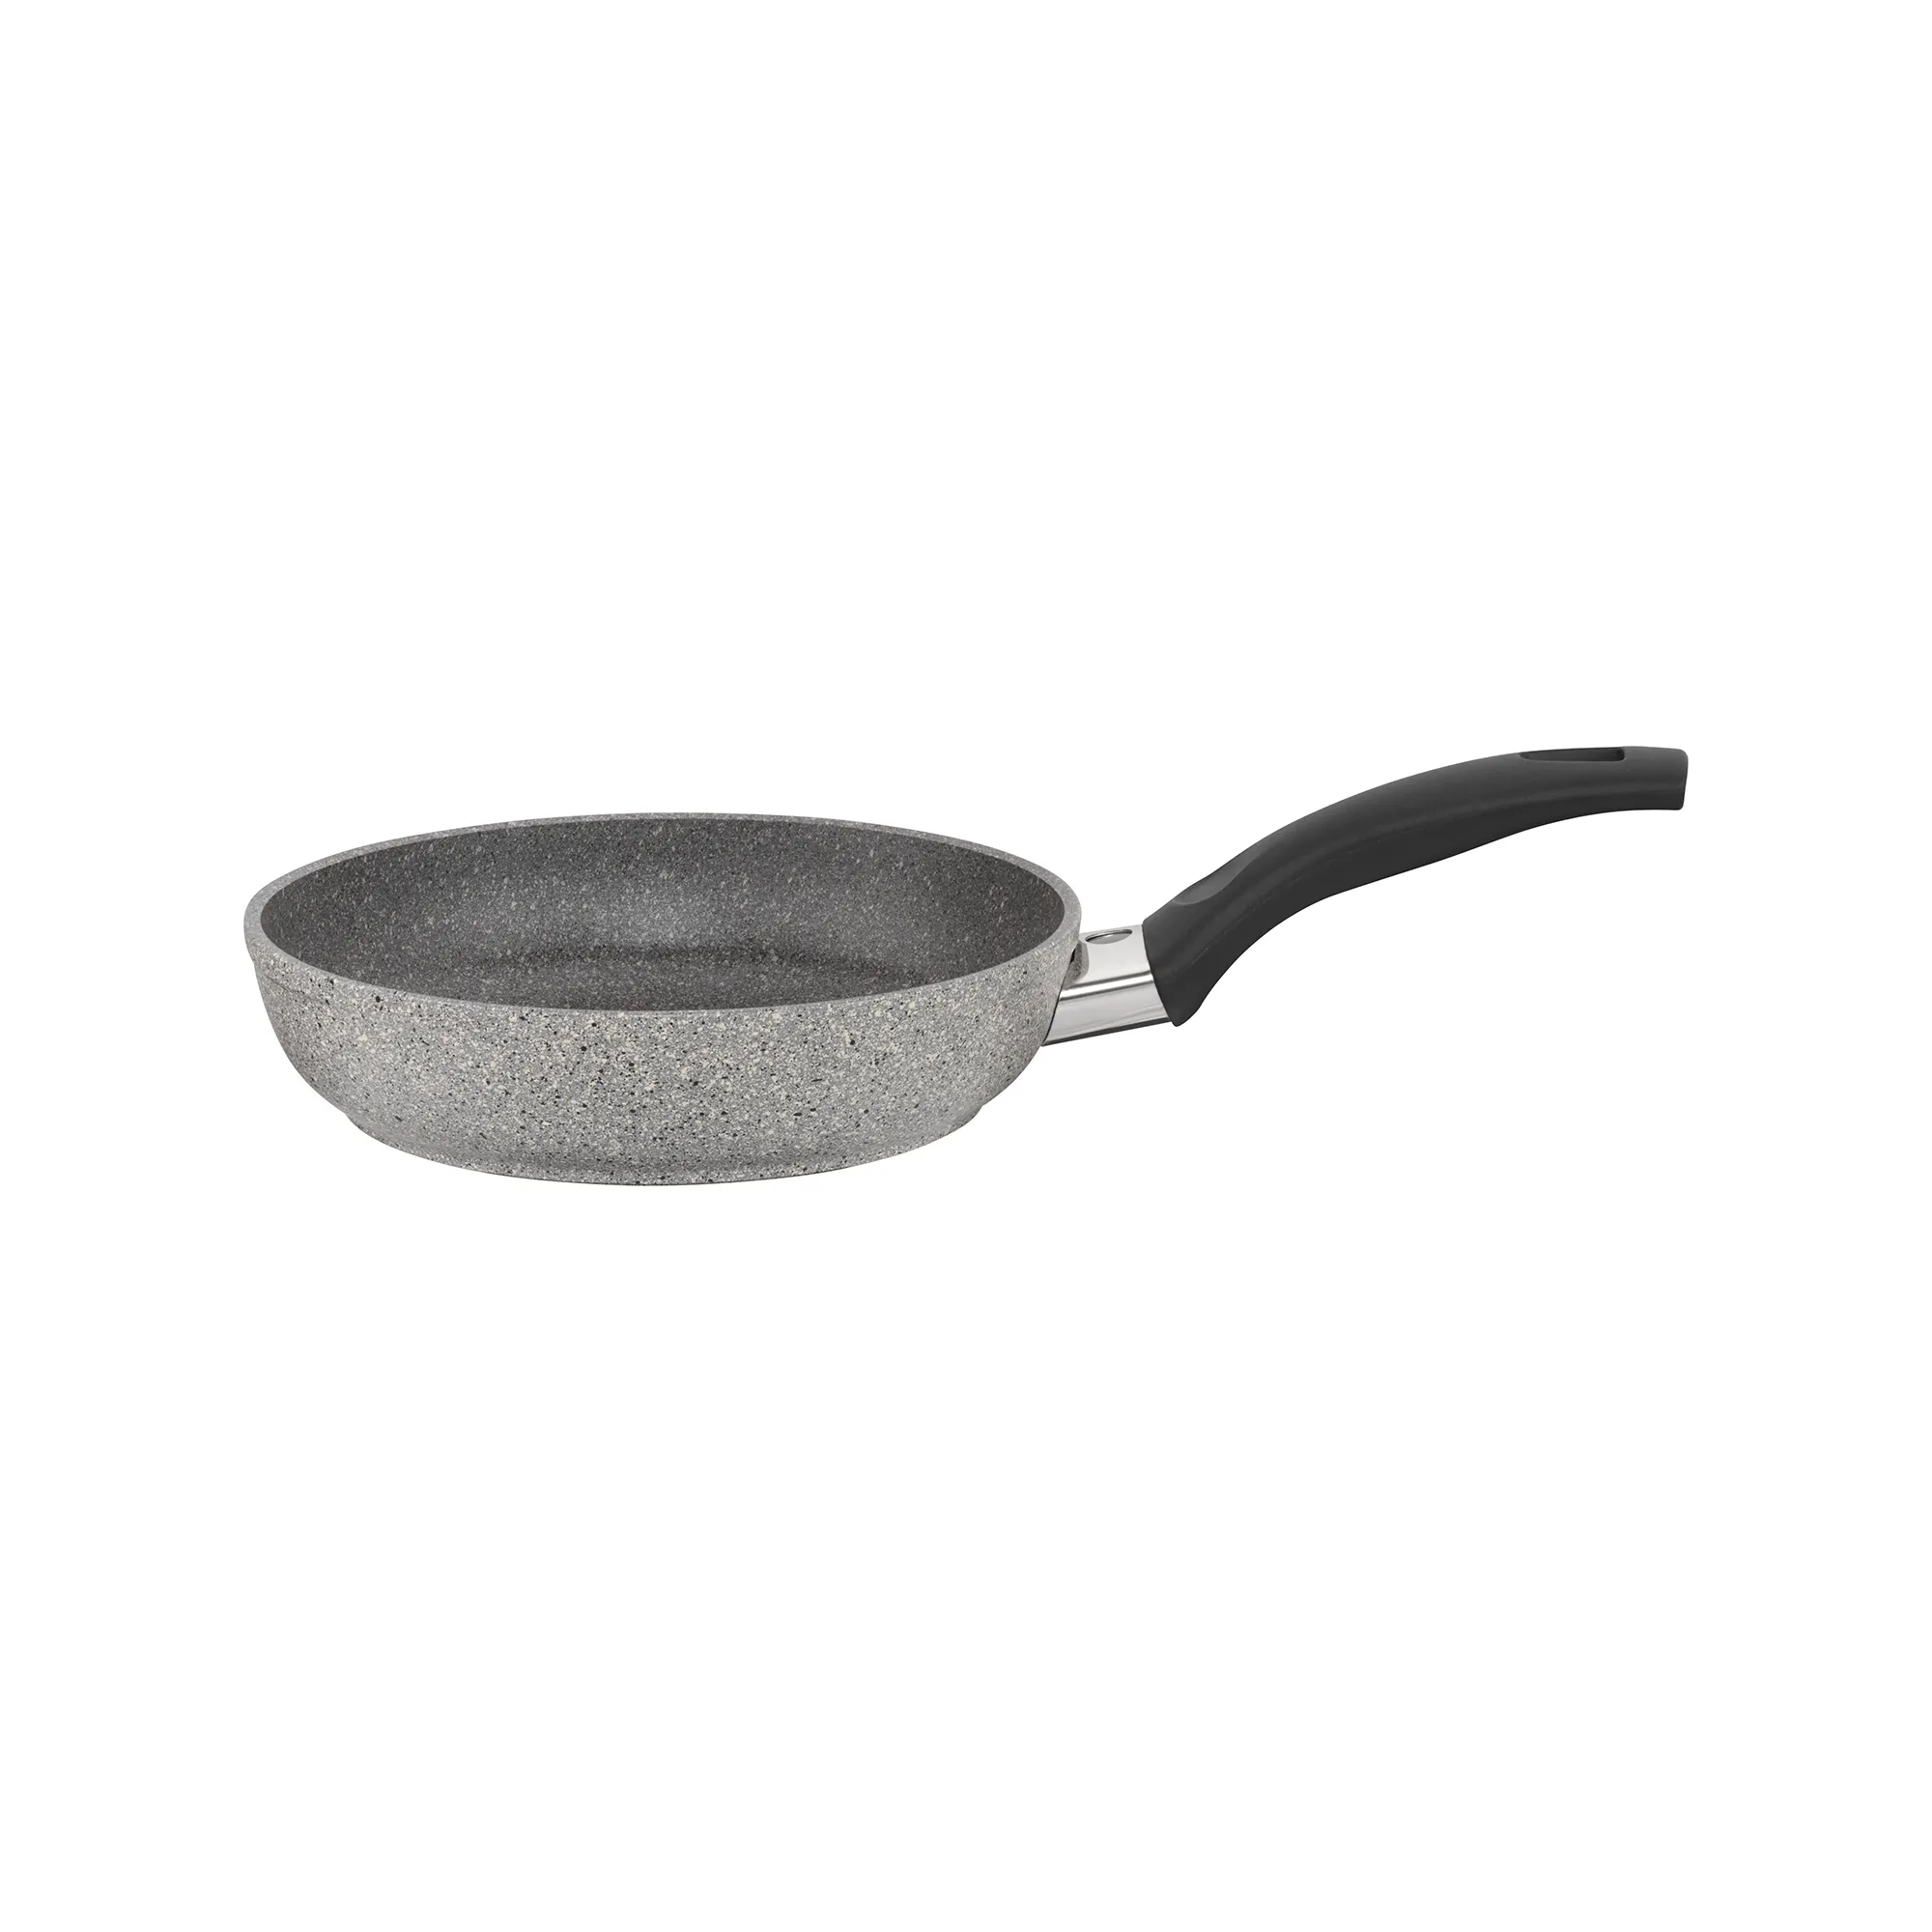 https://www.homethreads.com/files/zwilling/75001-641-ballarini-parma-by-henckels-forged-aluminum-8-inch-nonstick-fry-pan-made-in-italy.webp